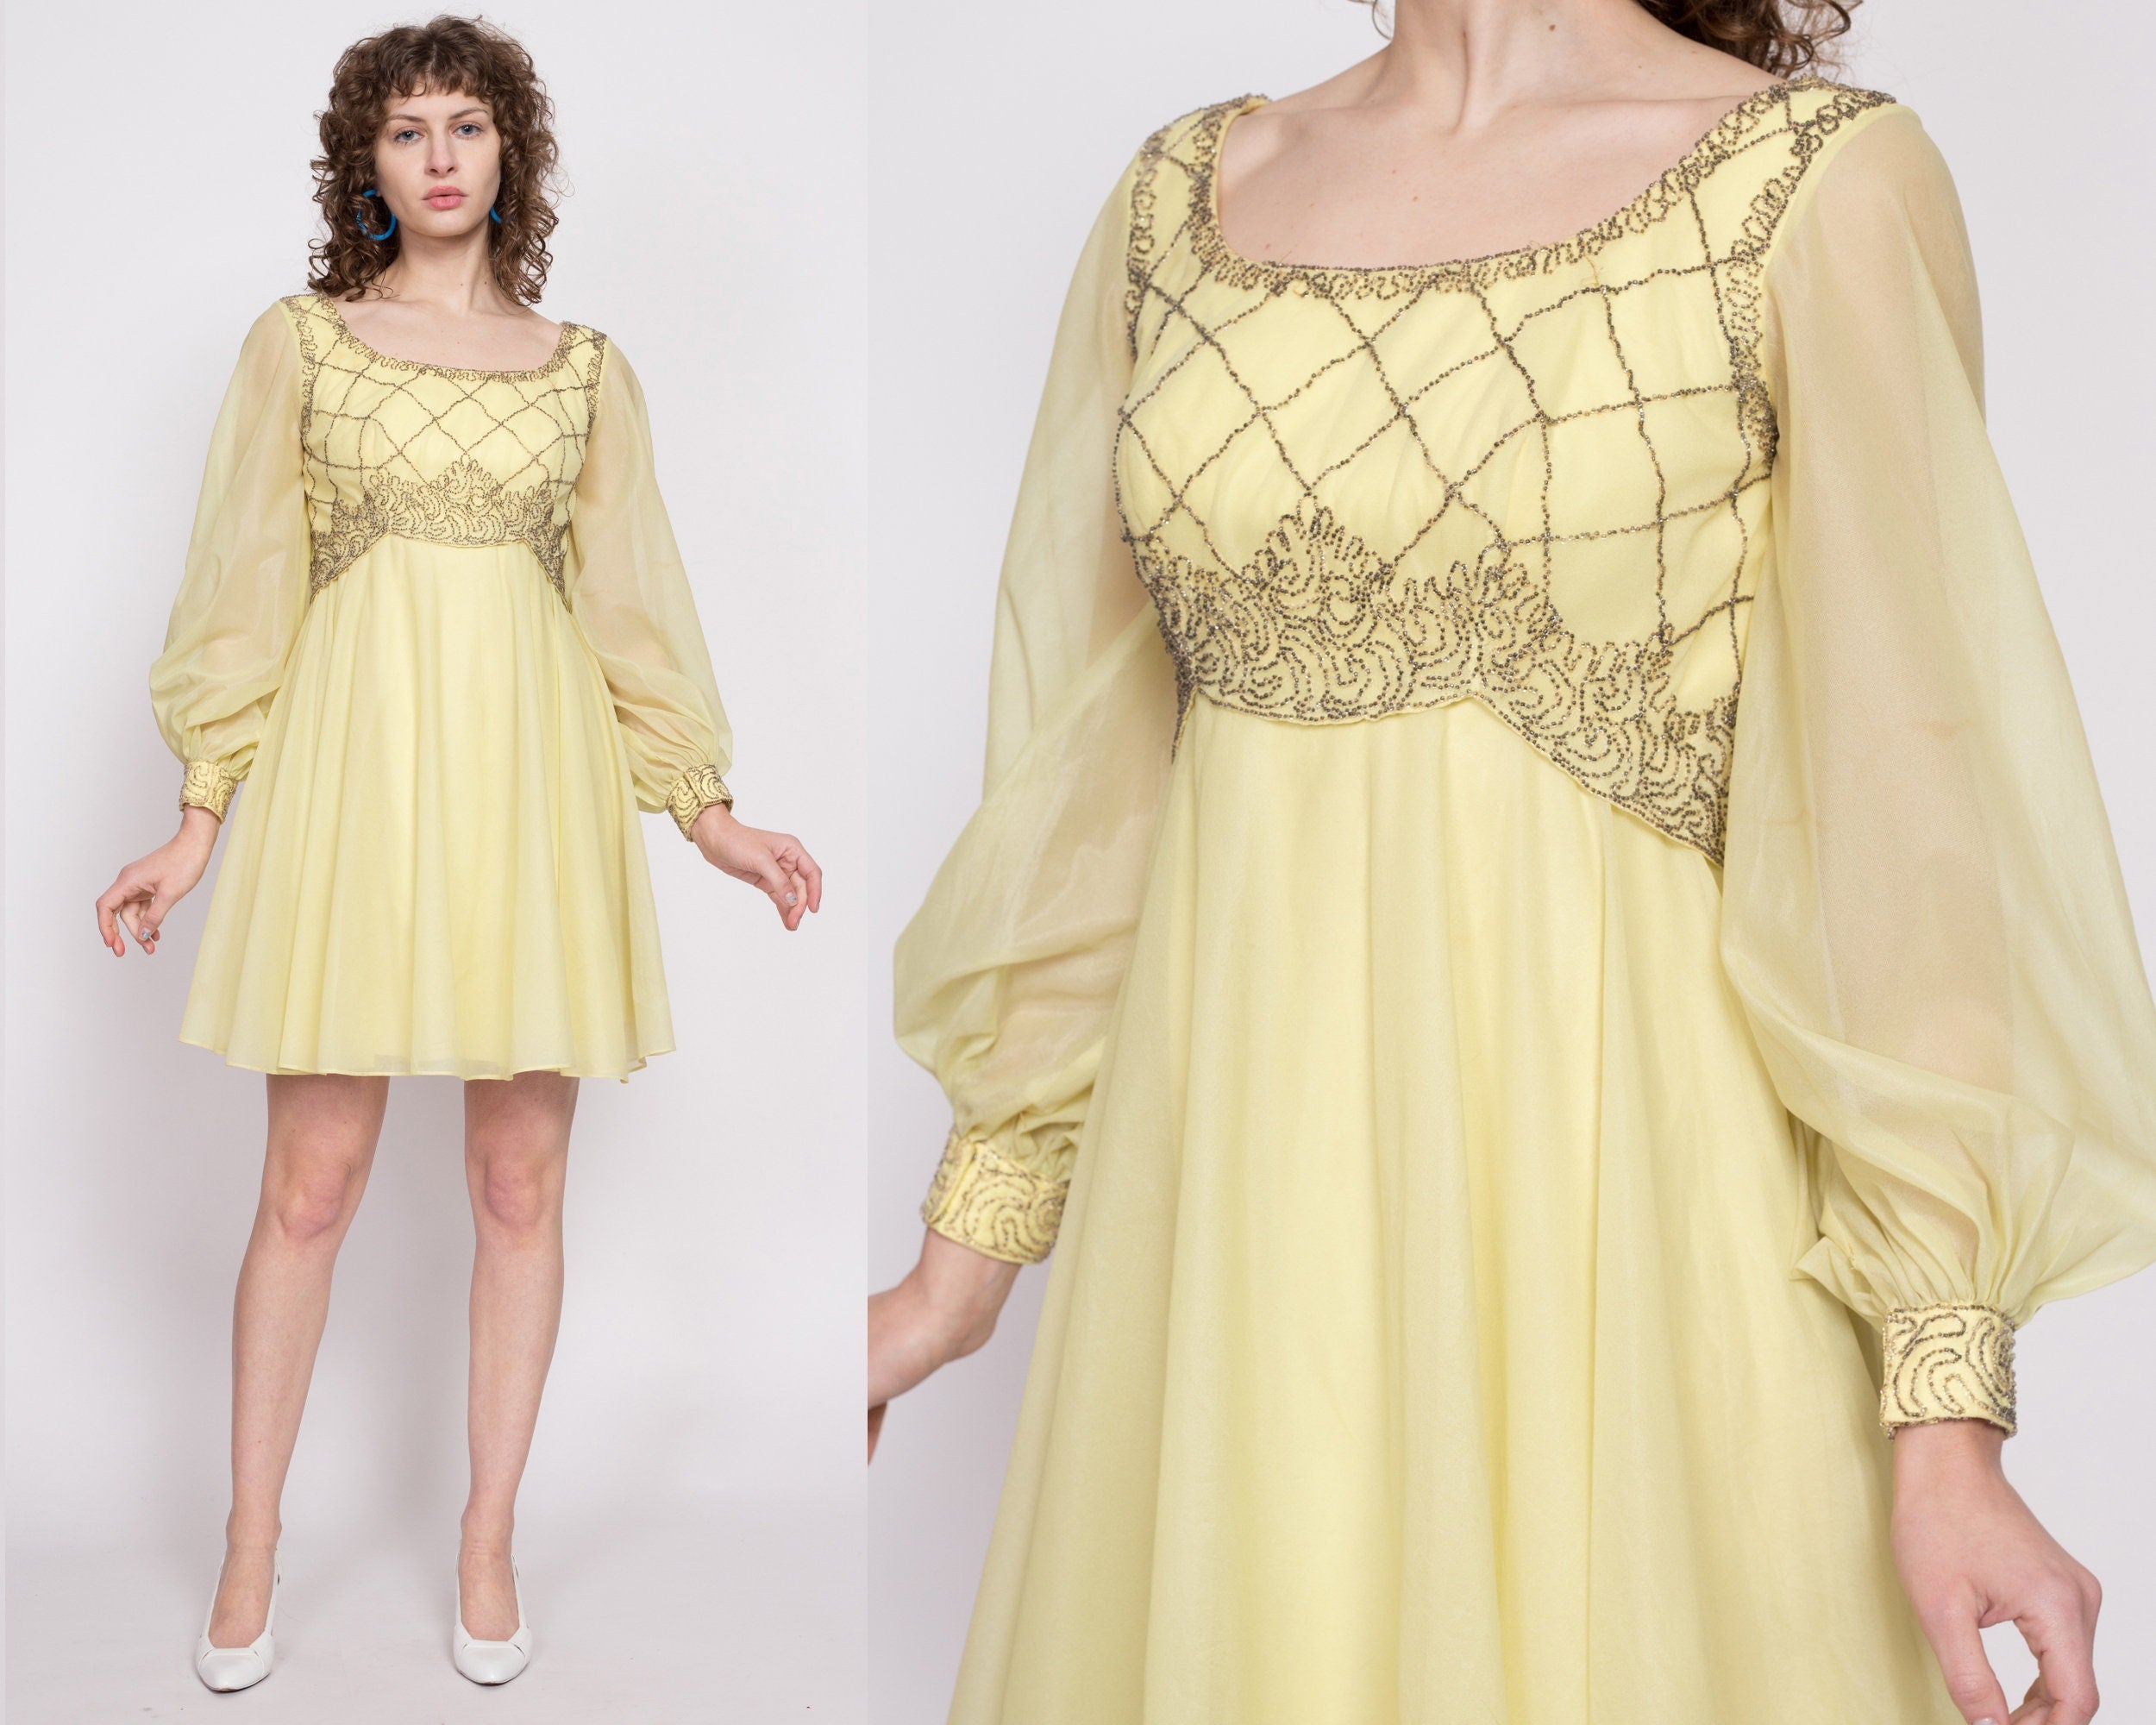 60s Mike Benet Formals Yellow Chiffon Party Dress, As Is - Medium